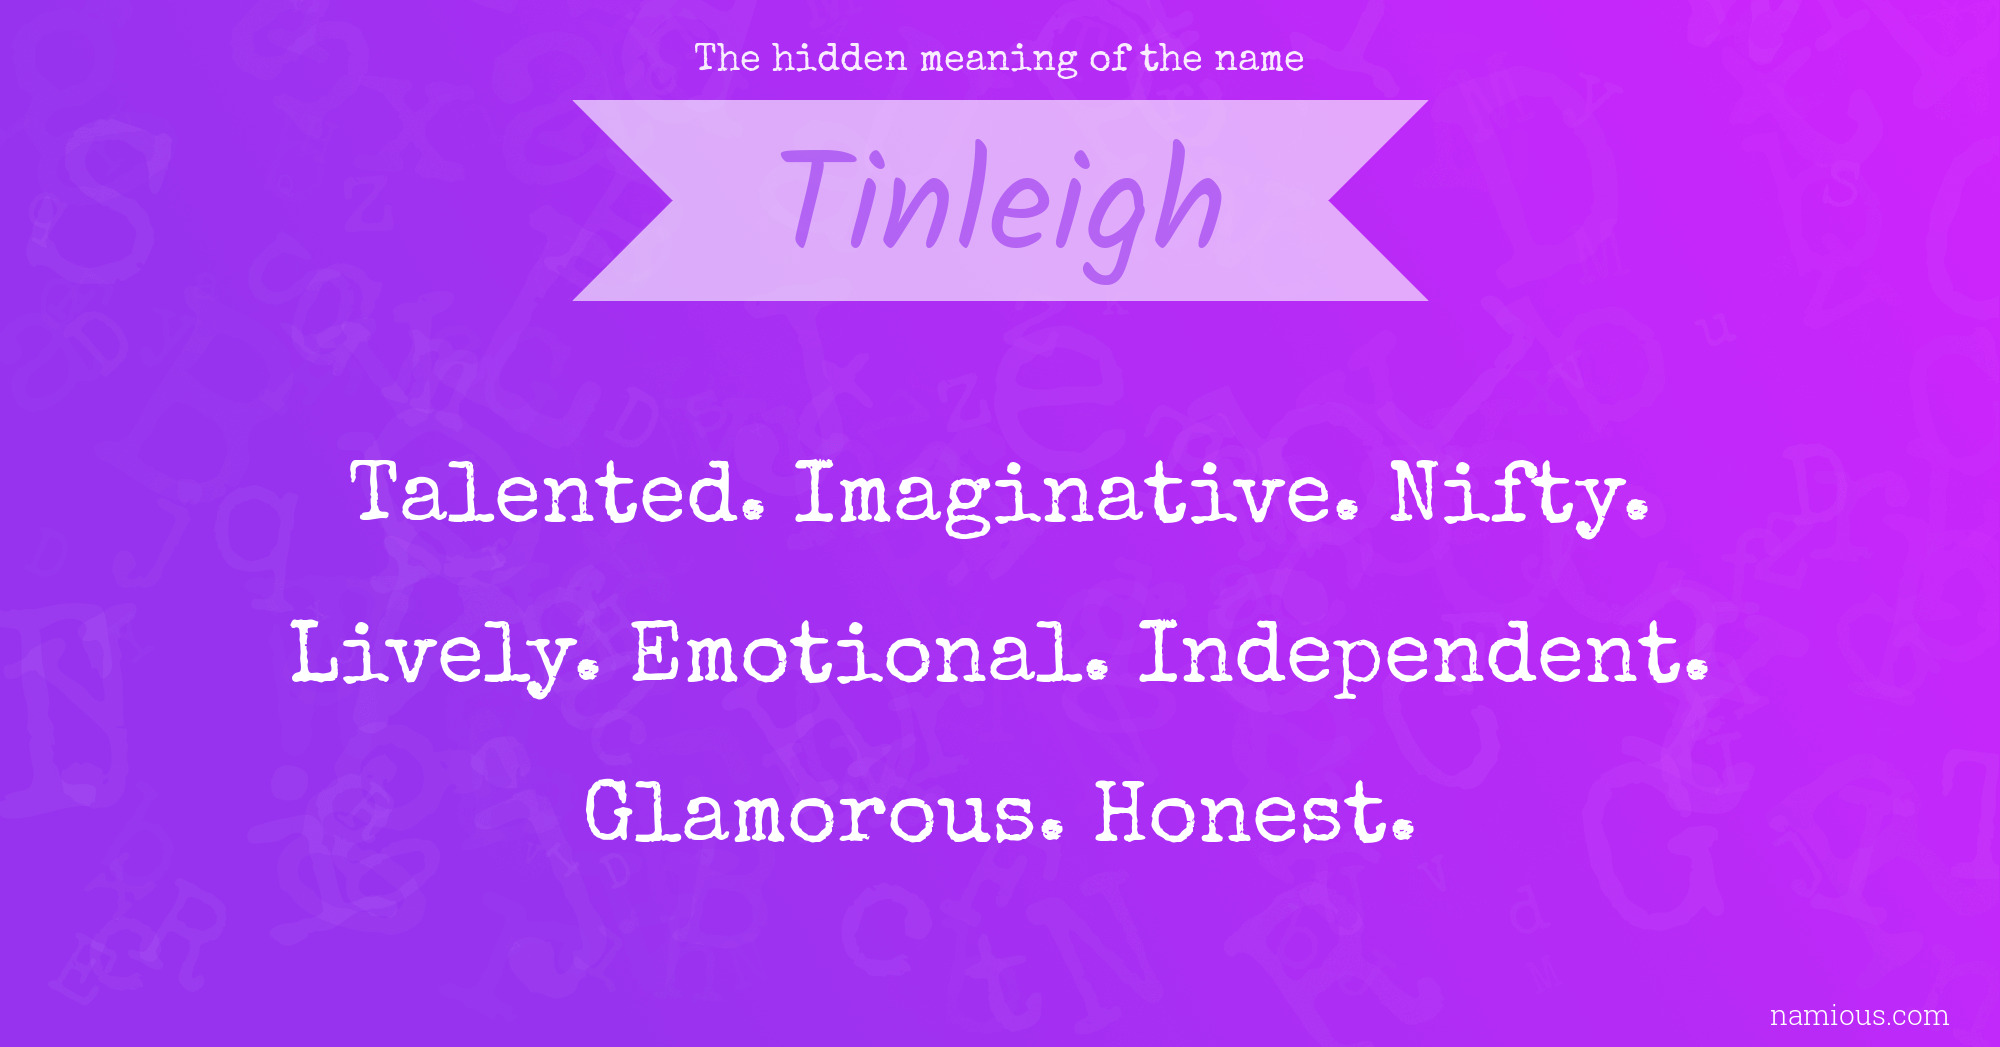 The hidden meaning of the name Tinleigh